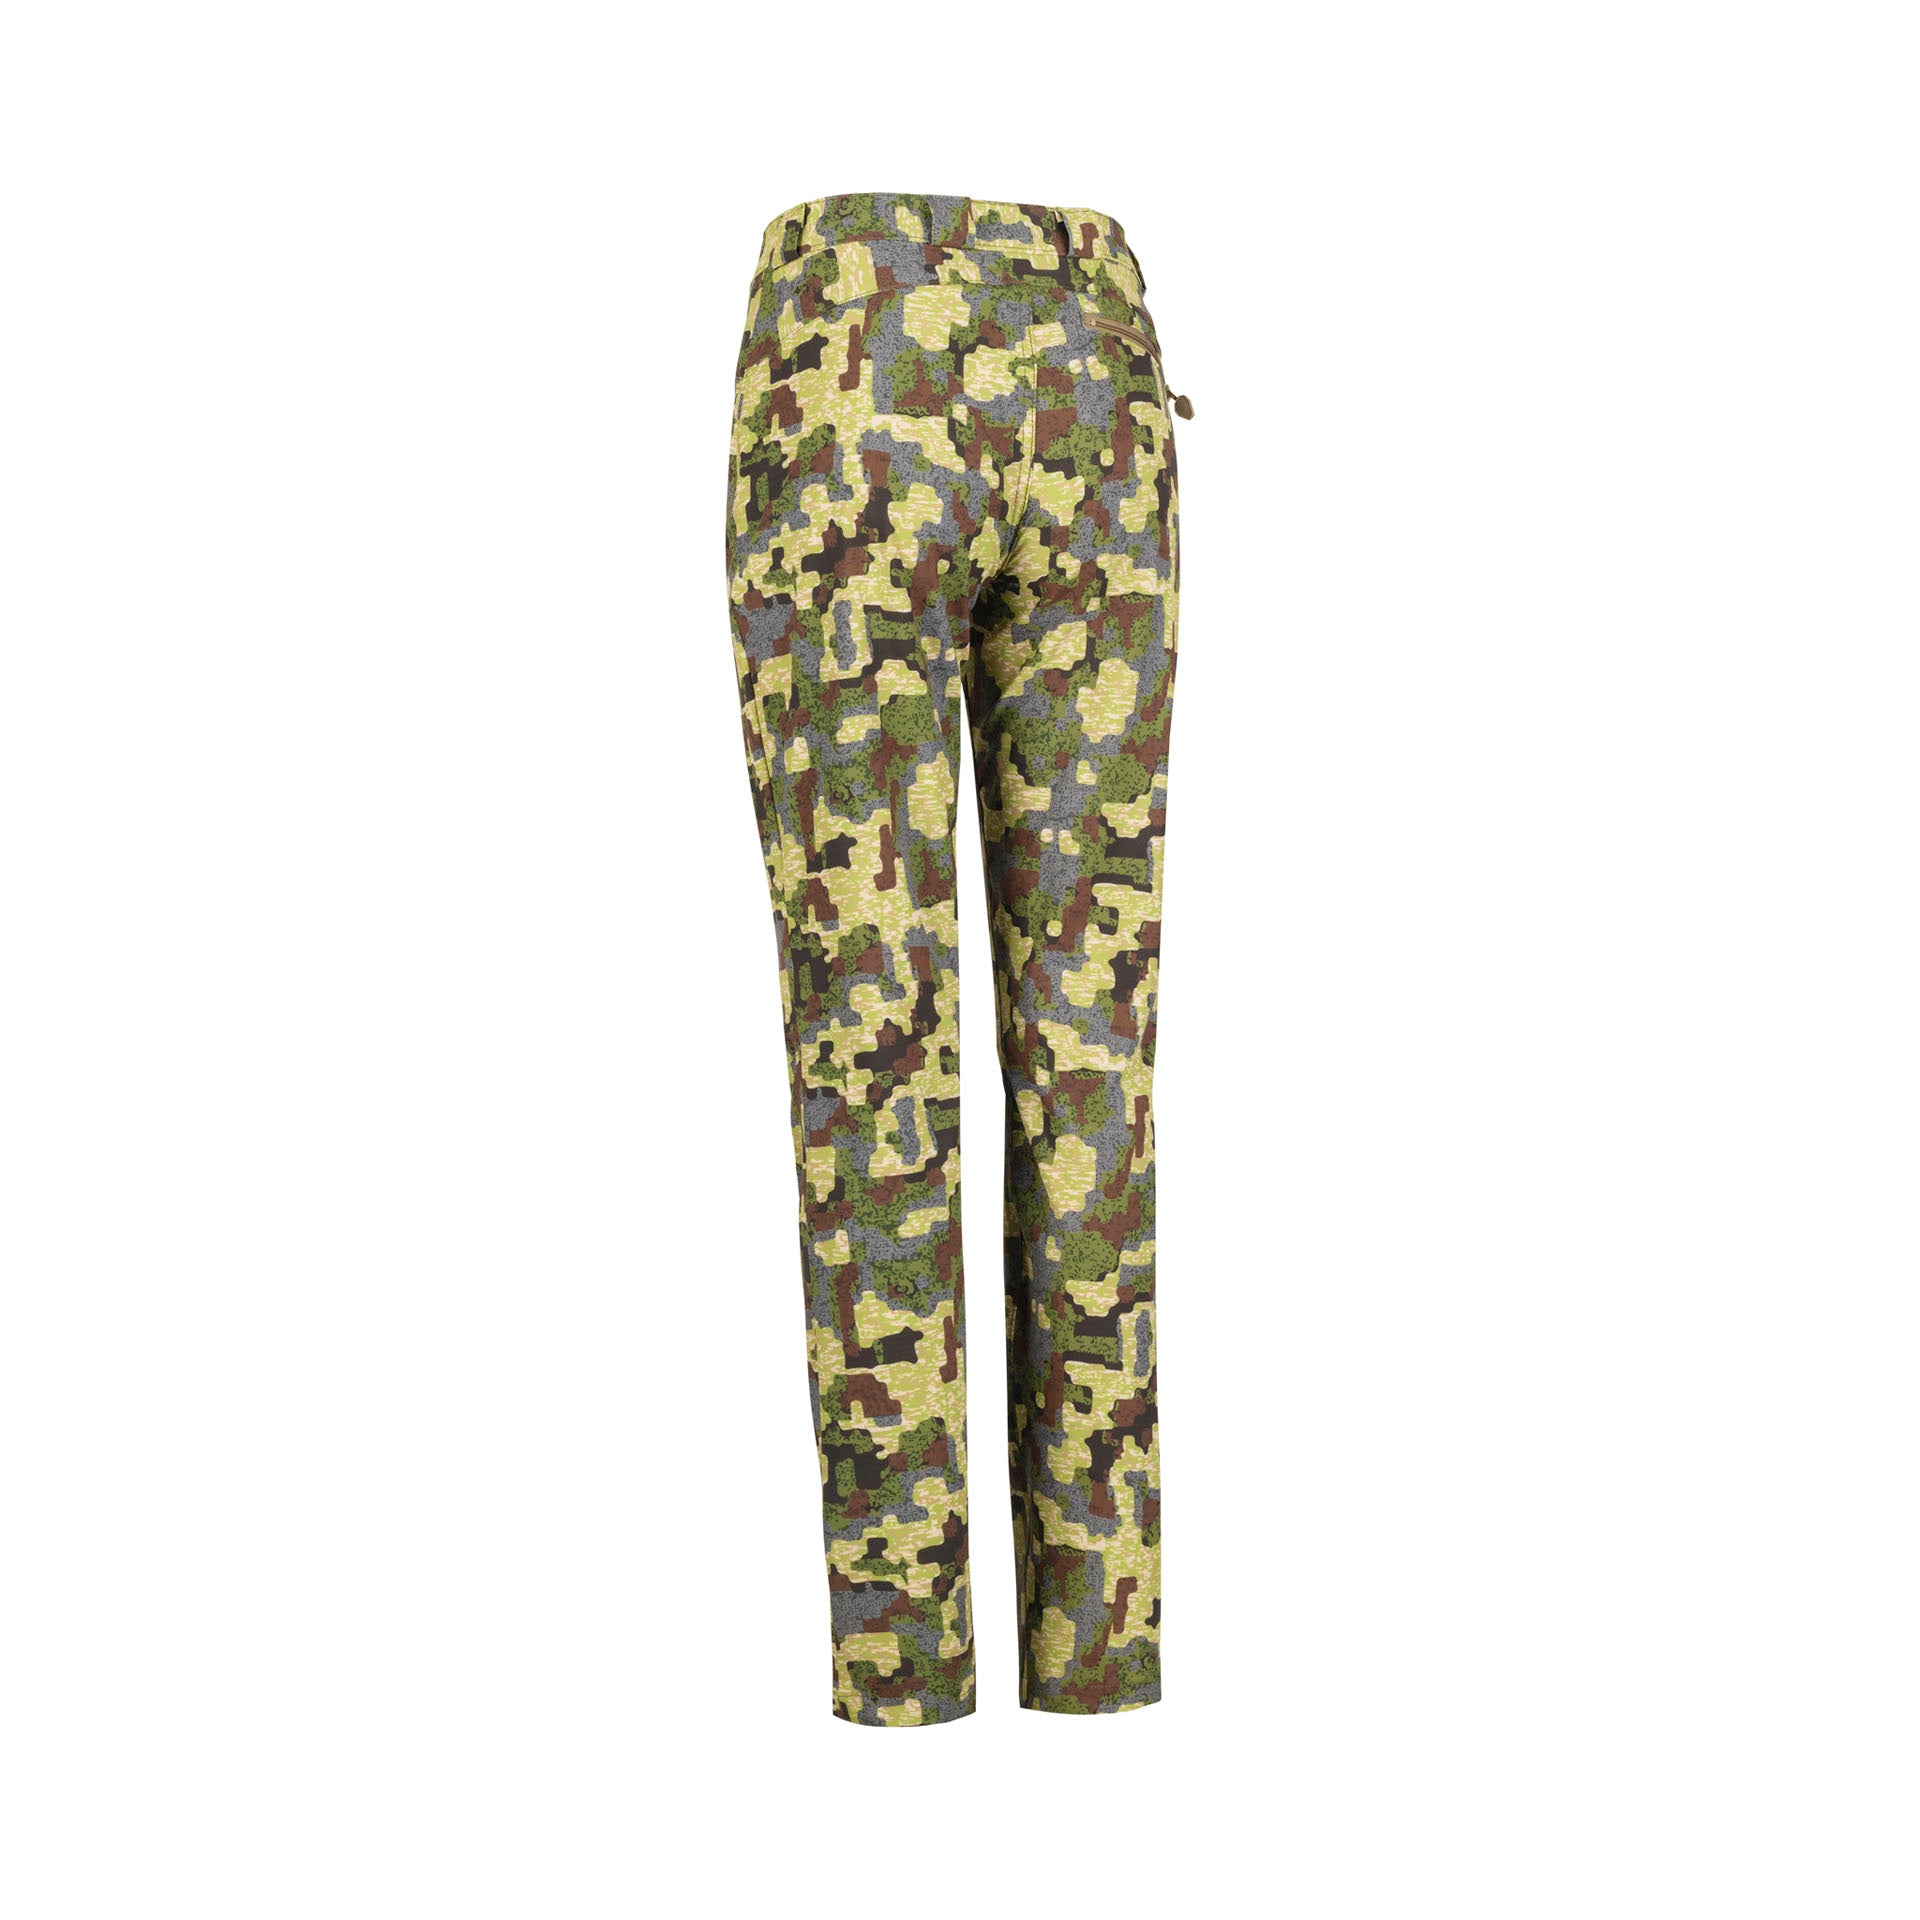 Harajuku Camo Womens High Waist Pants With Pockets Multicolor Straight Camouflage  Trousers Women For Casual Streetwear From Haomaoo, $24.36 | DHgate.Com